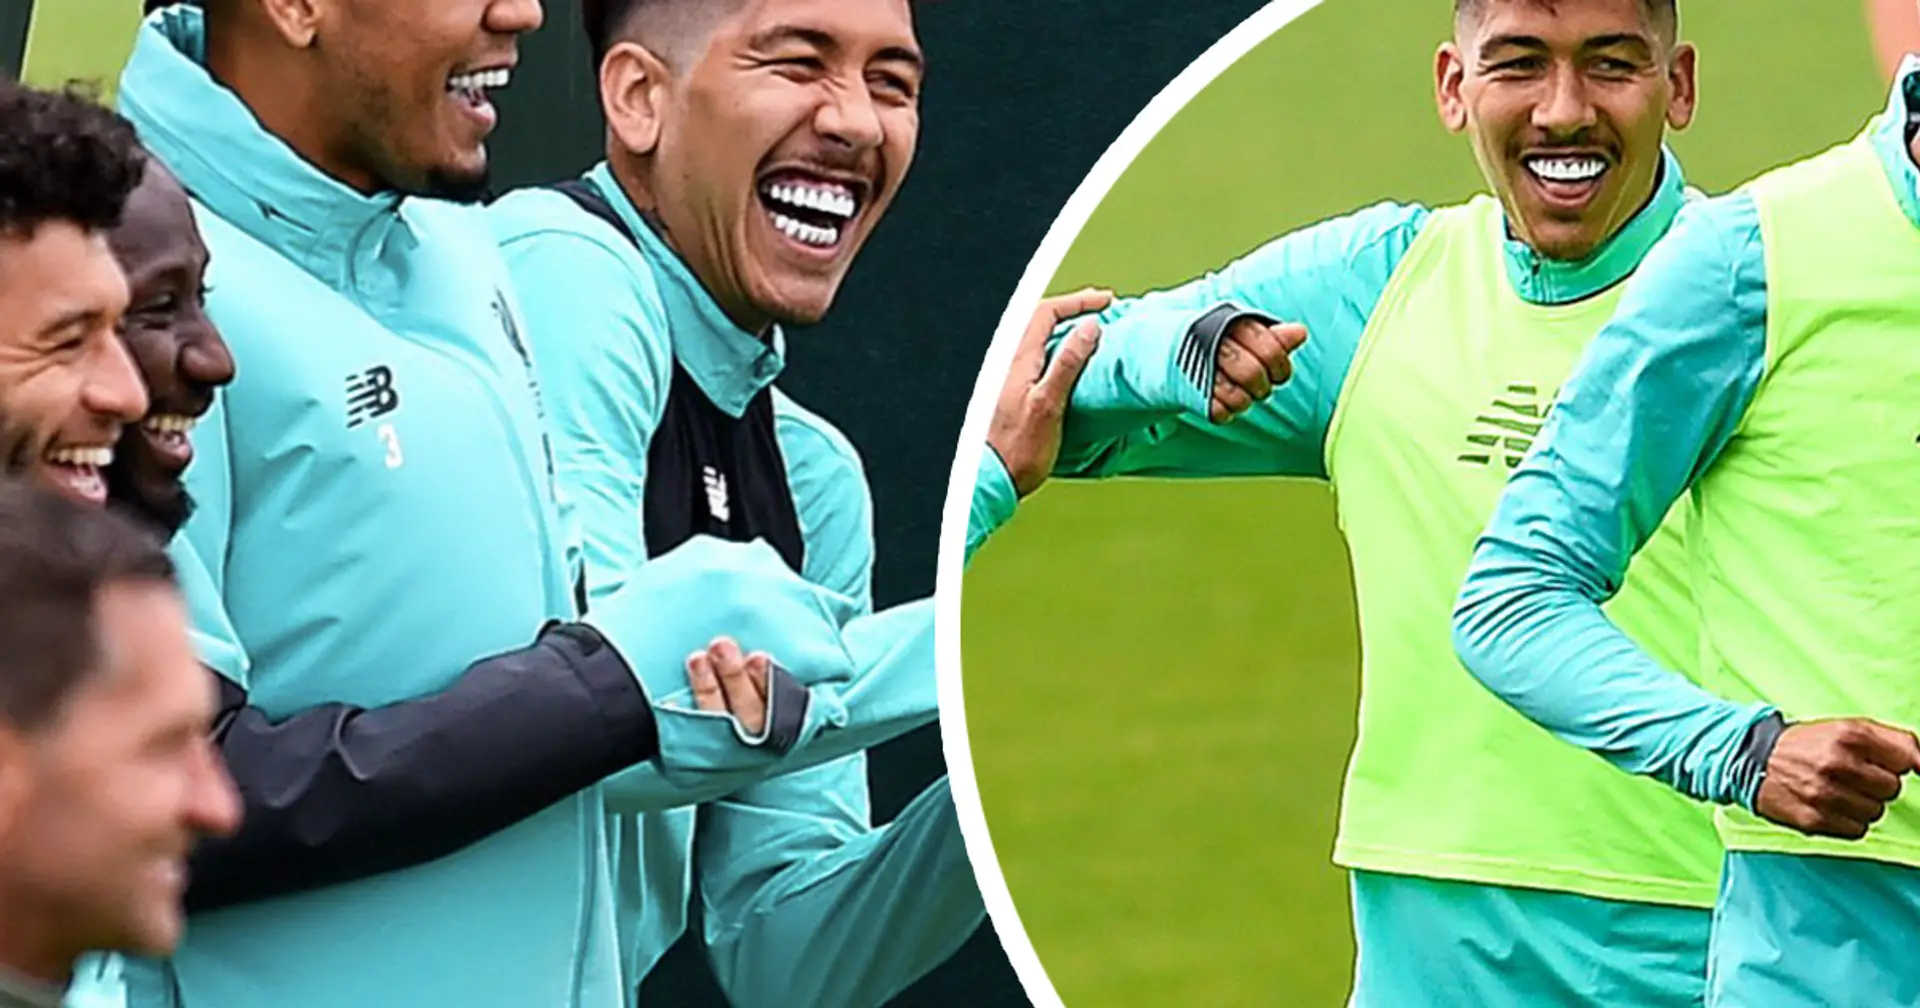 Roberto Firmino dyed his hair RED after winning the Premier League title